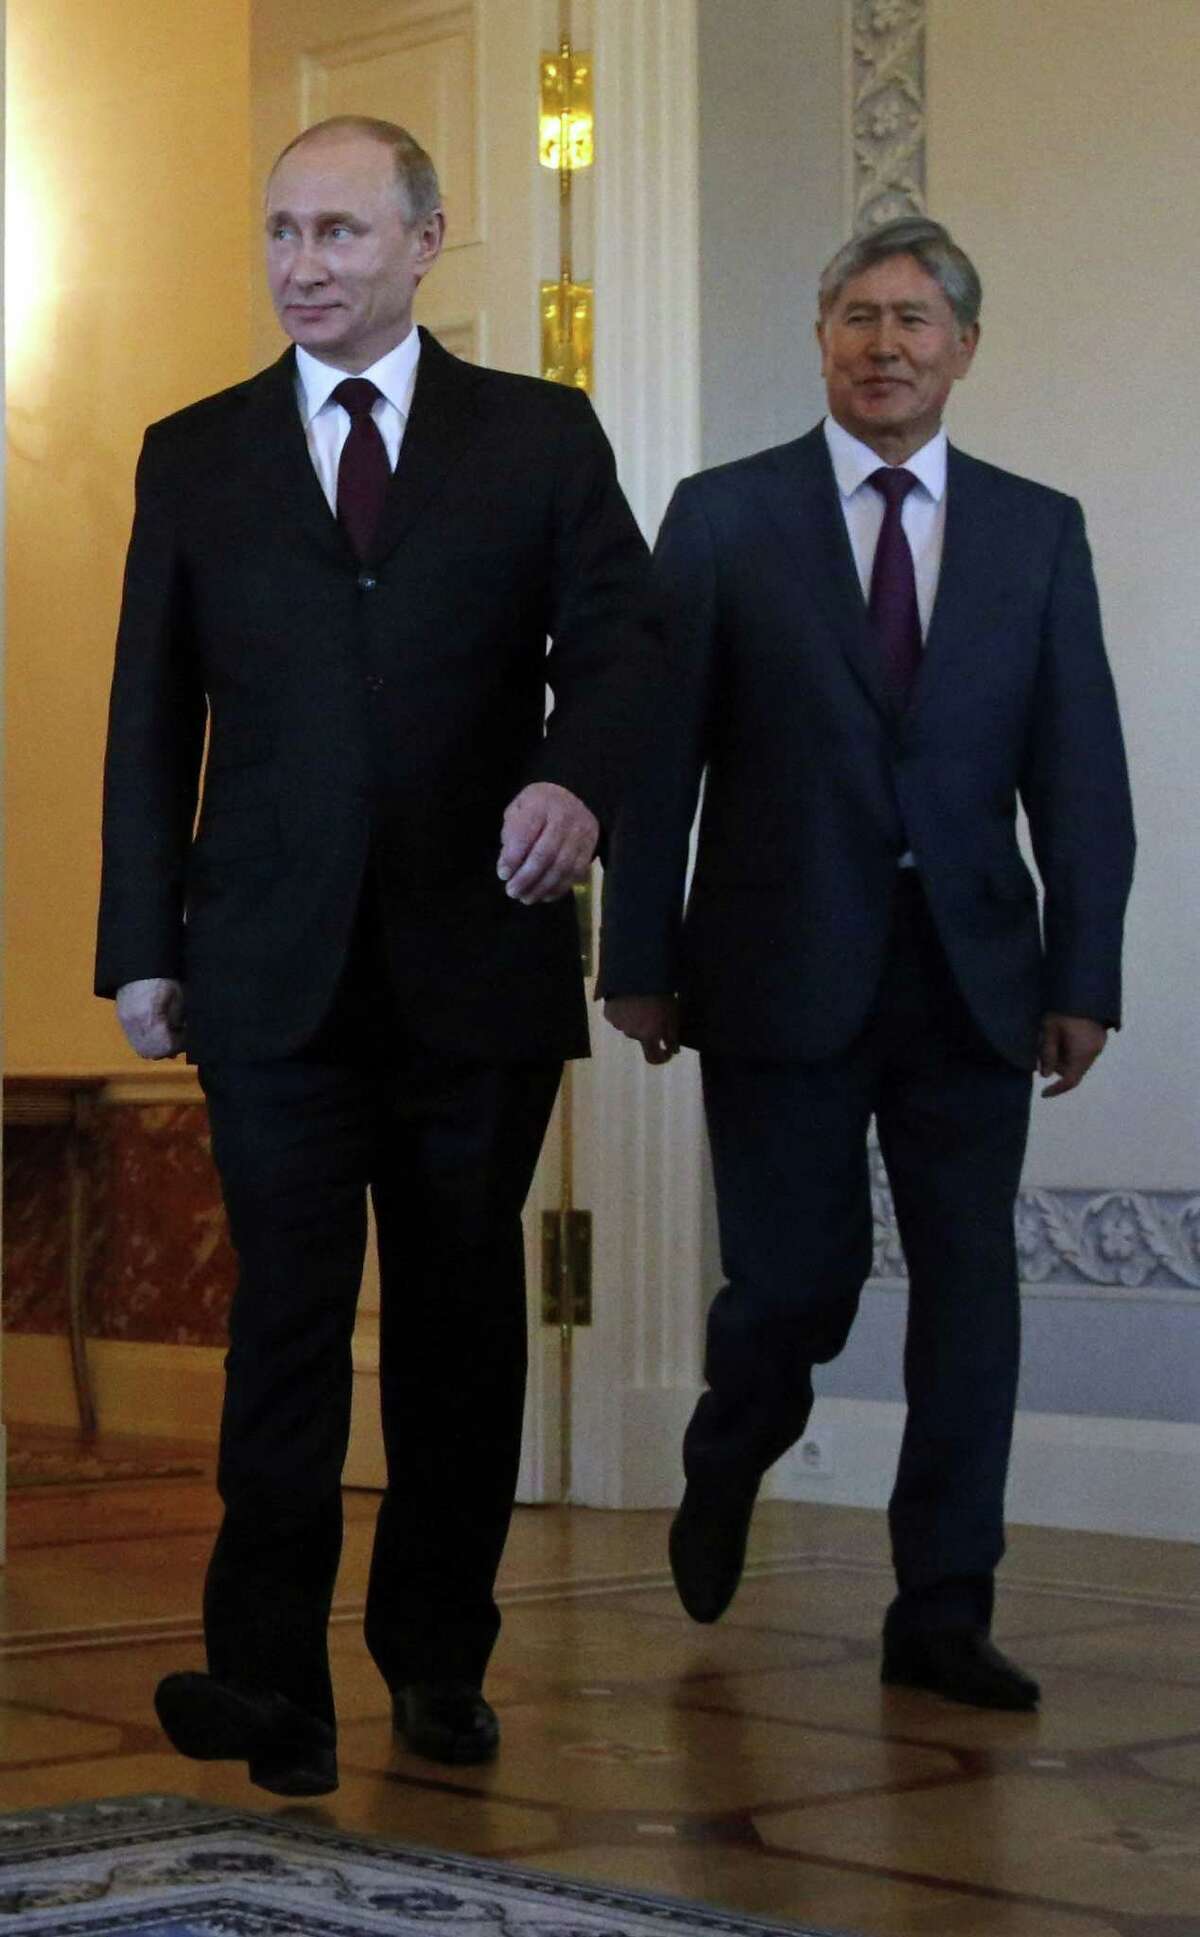 Russian President Vladimir Putin, left, and Kyrgyz President Almazbek Atambayev enter the hall for their meeting in the Konstantin Palace outside St. Petersburg, Russia on March 16, 2015.